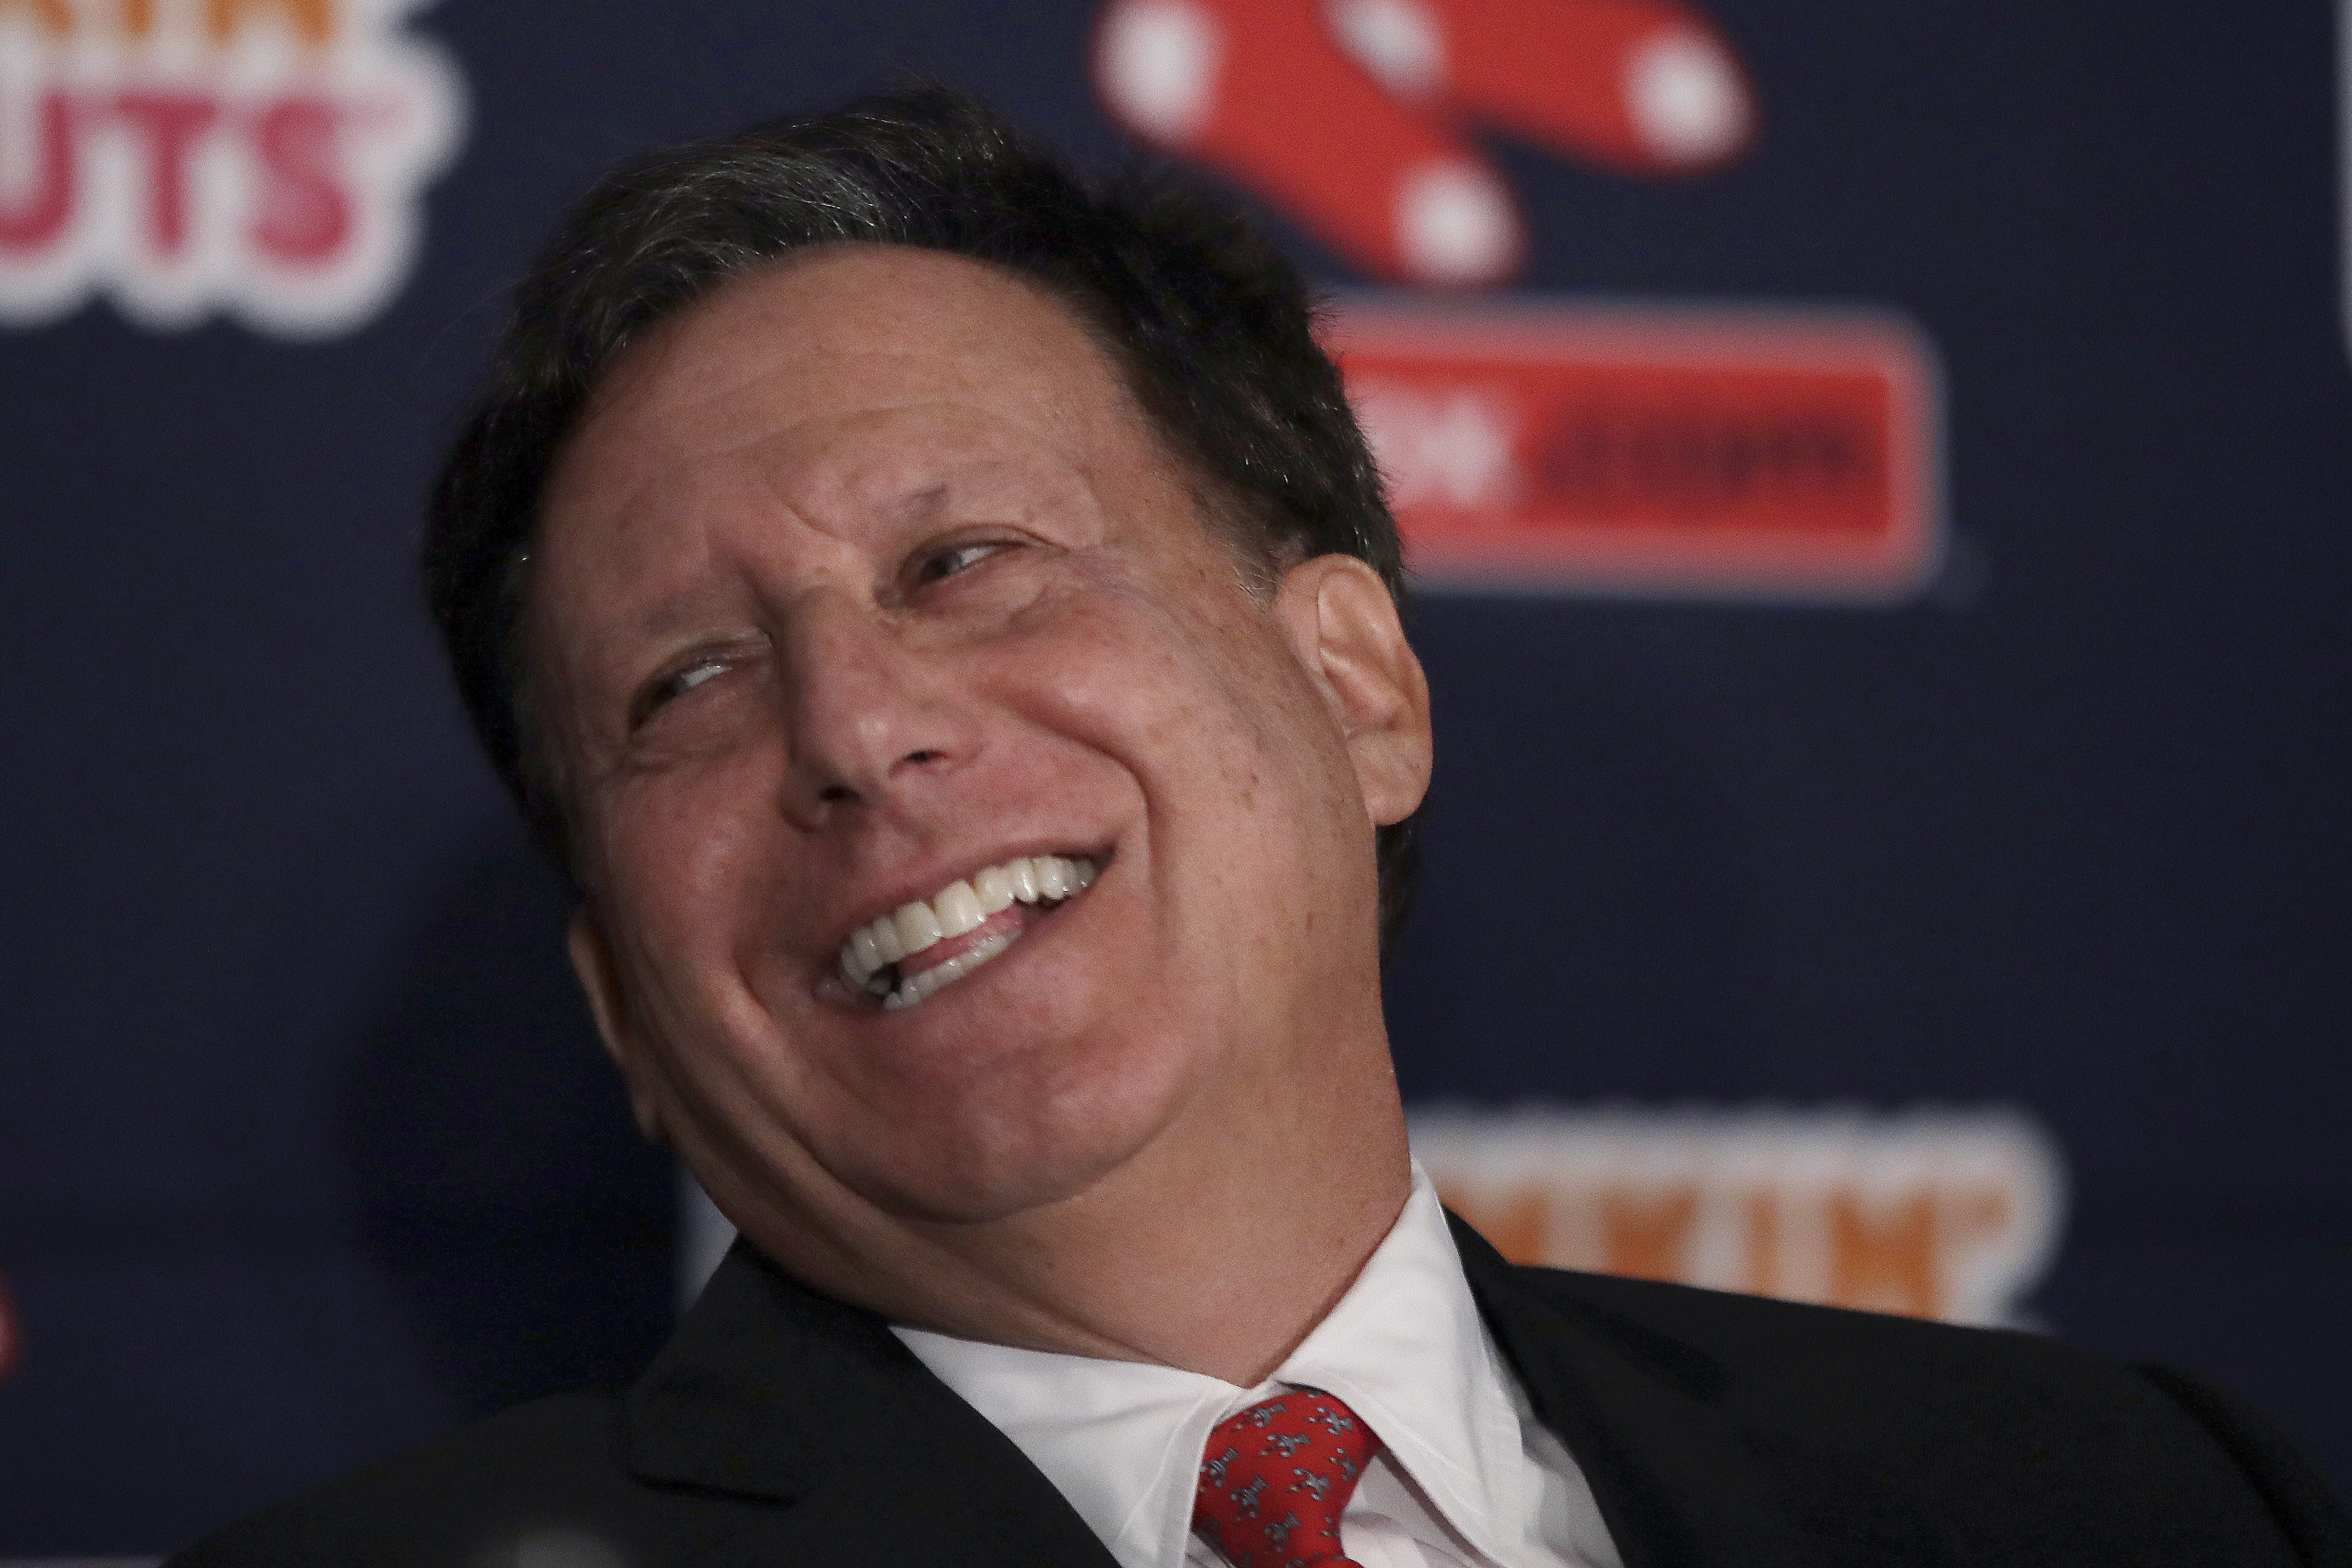 Tom Werner sounded happy to be part of a group that is investing in the Pittsburgh Penguins.